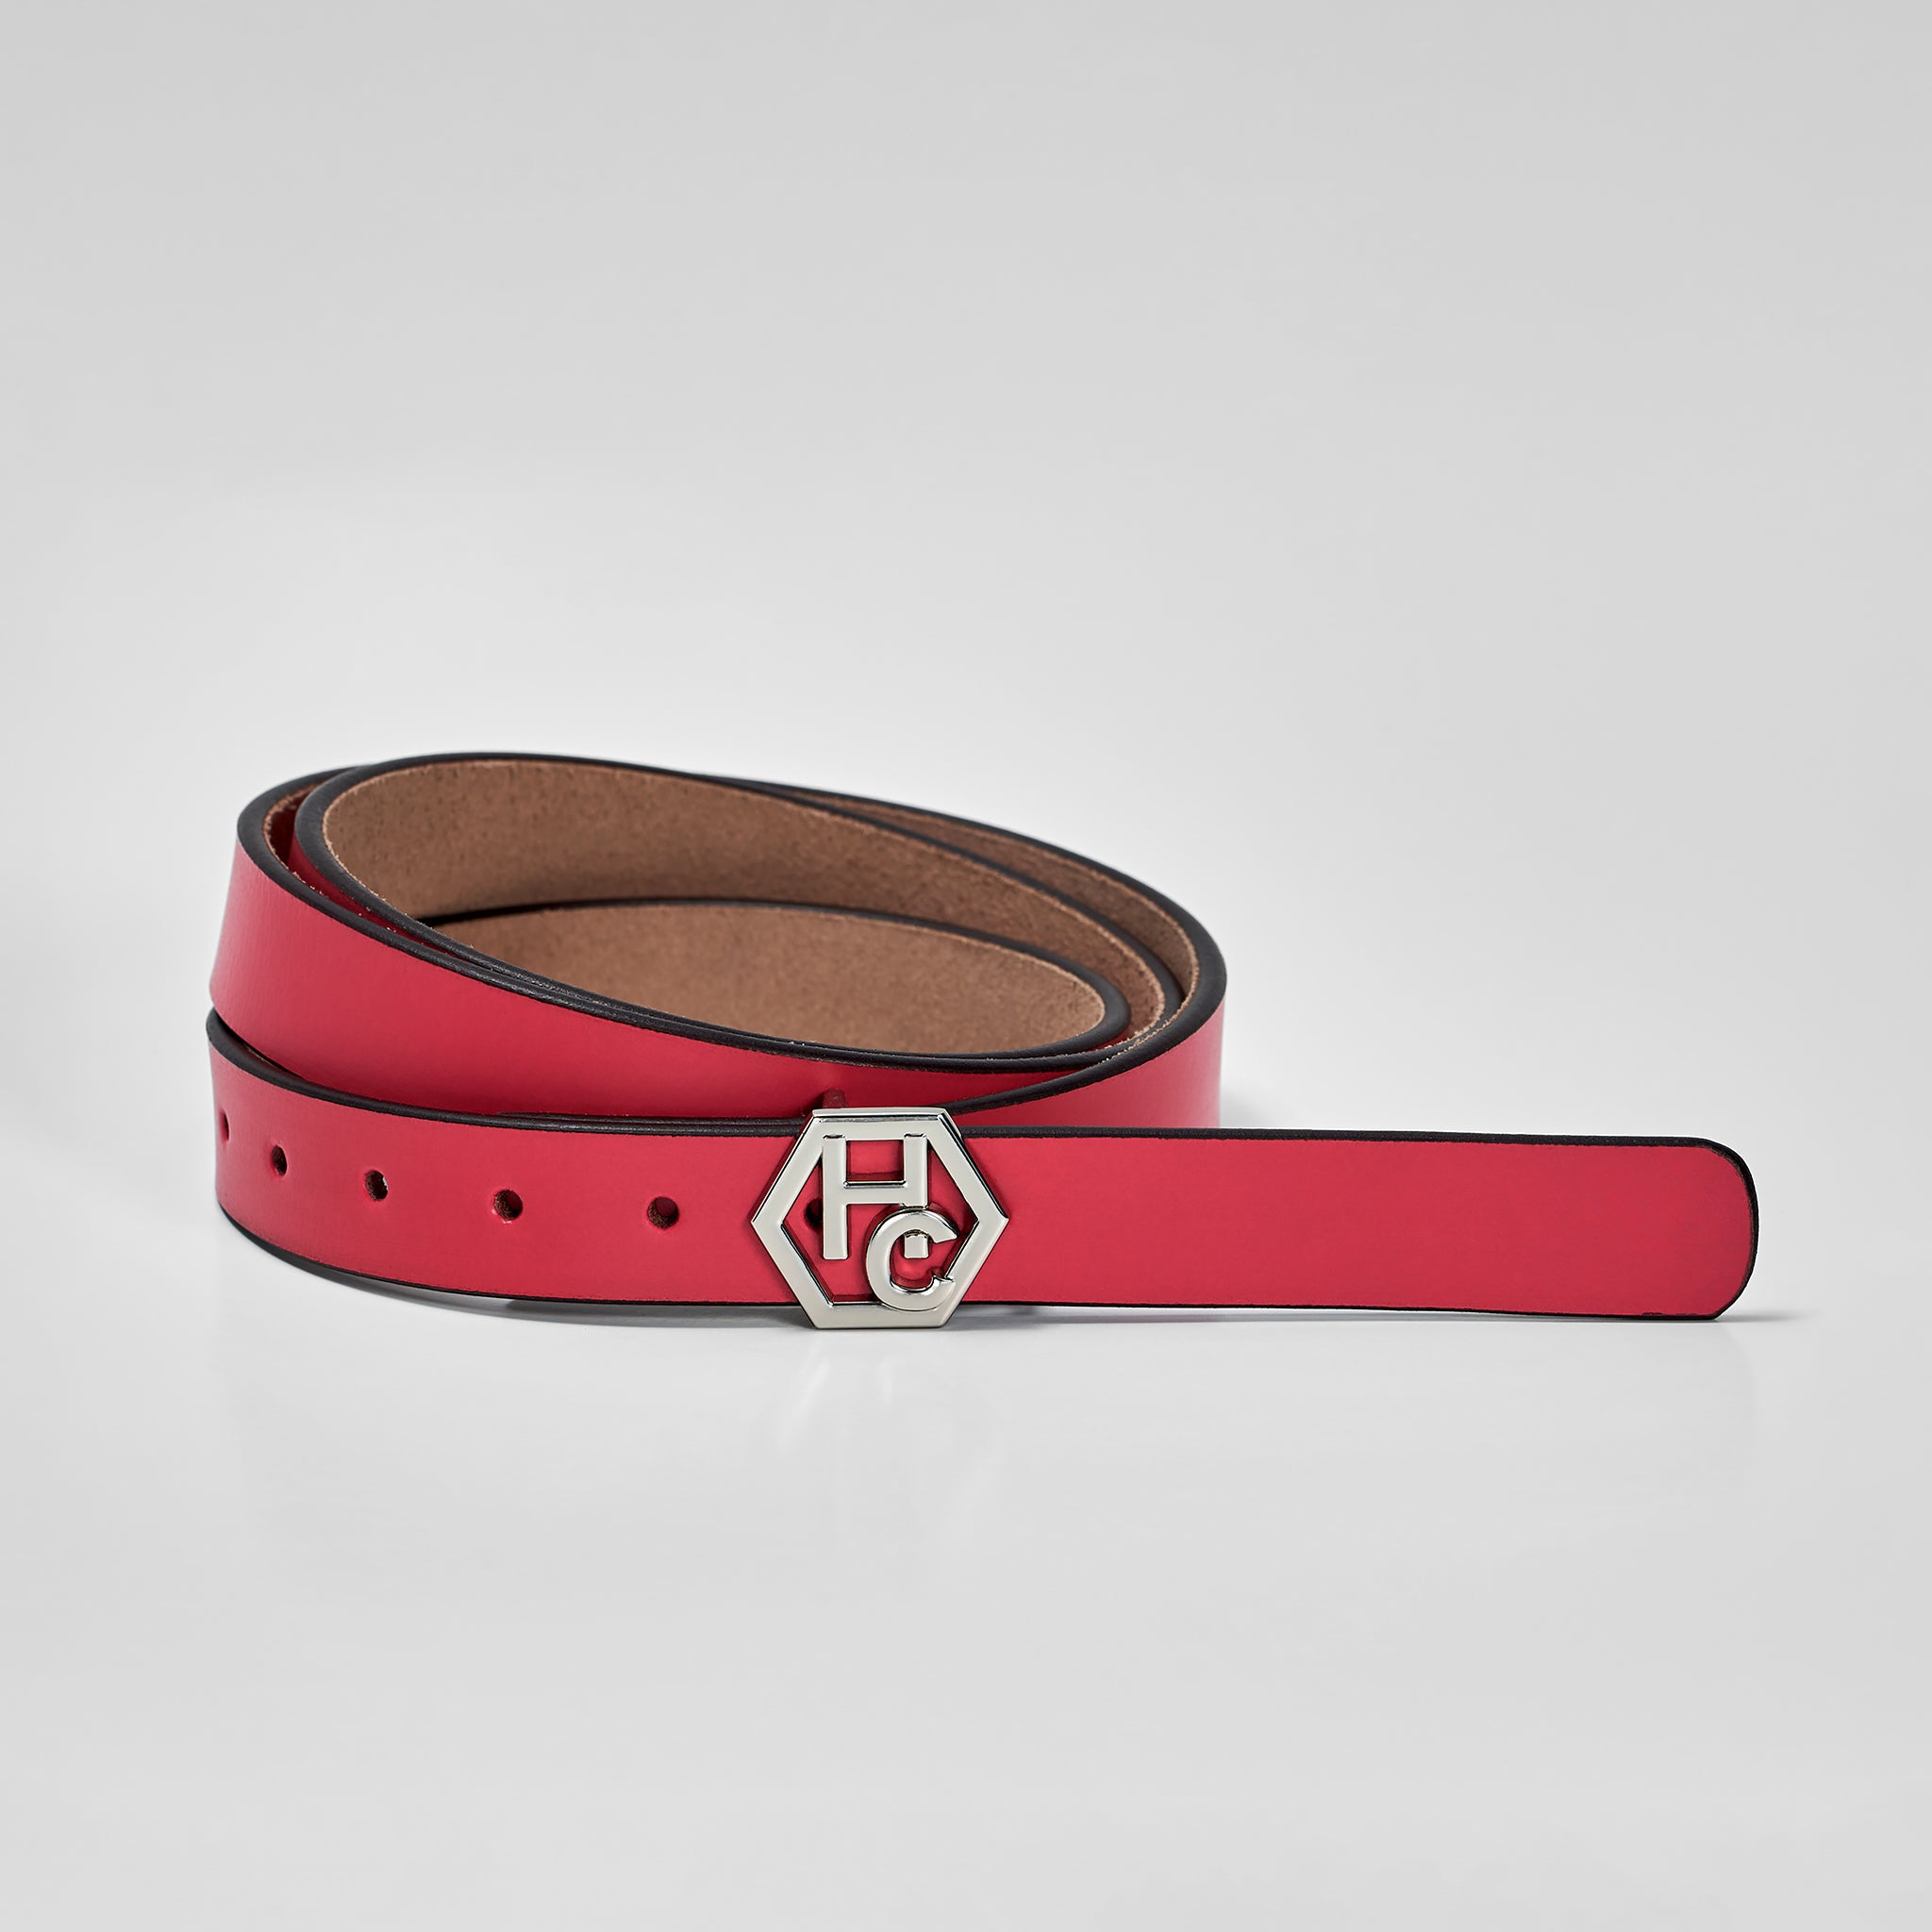 Hedonist Chicago Seamless Pink Red Leather Belt 1" 32381345464471